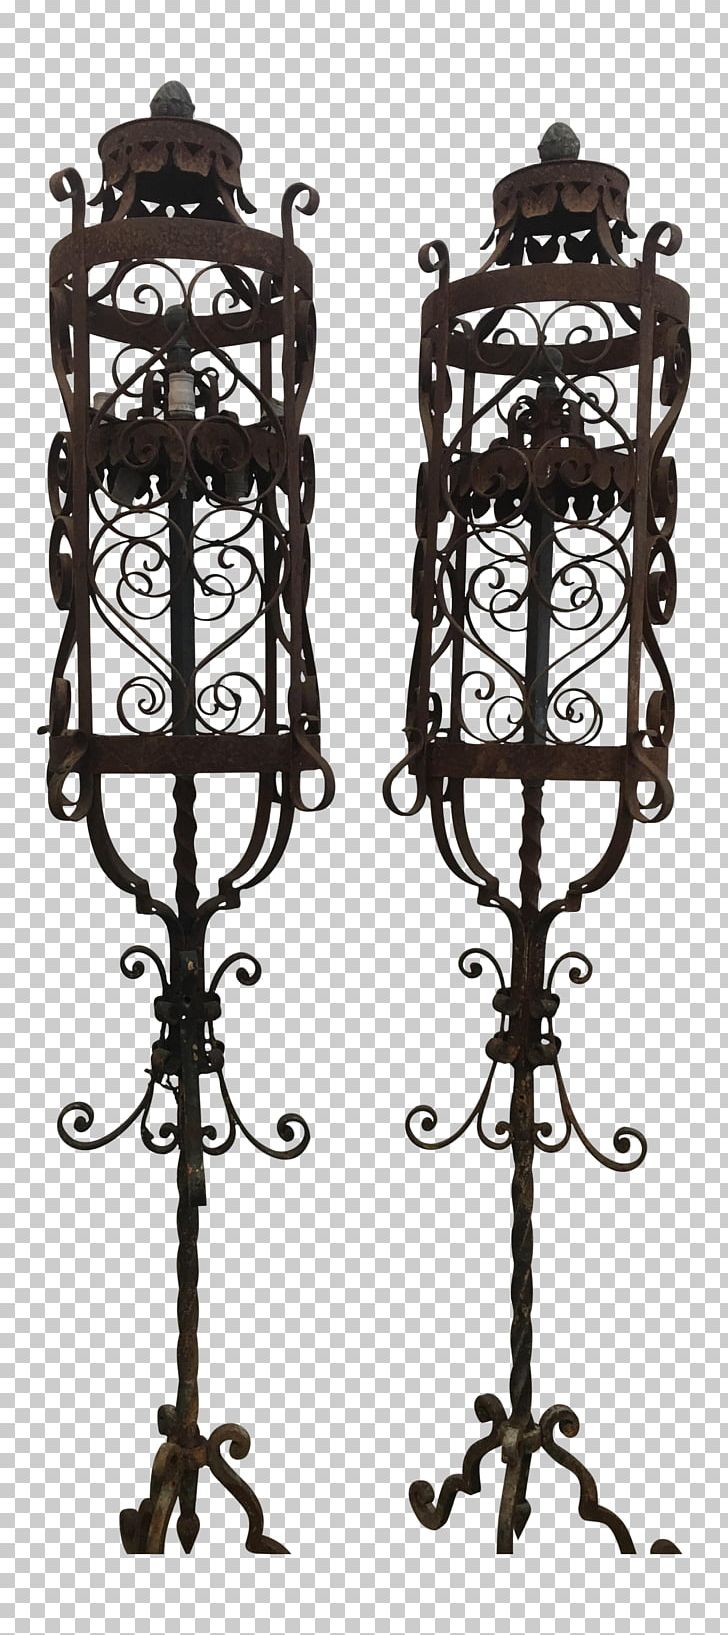 Wrought Iron Table Electric Light Chair PNG, Clipart, Antique, Candle, Candle Holder, Candlestick, Chair Free PNG Download